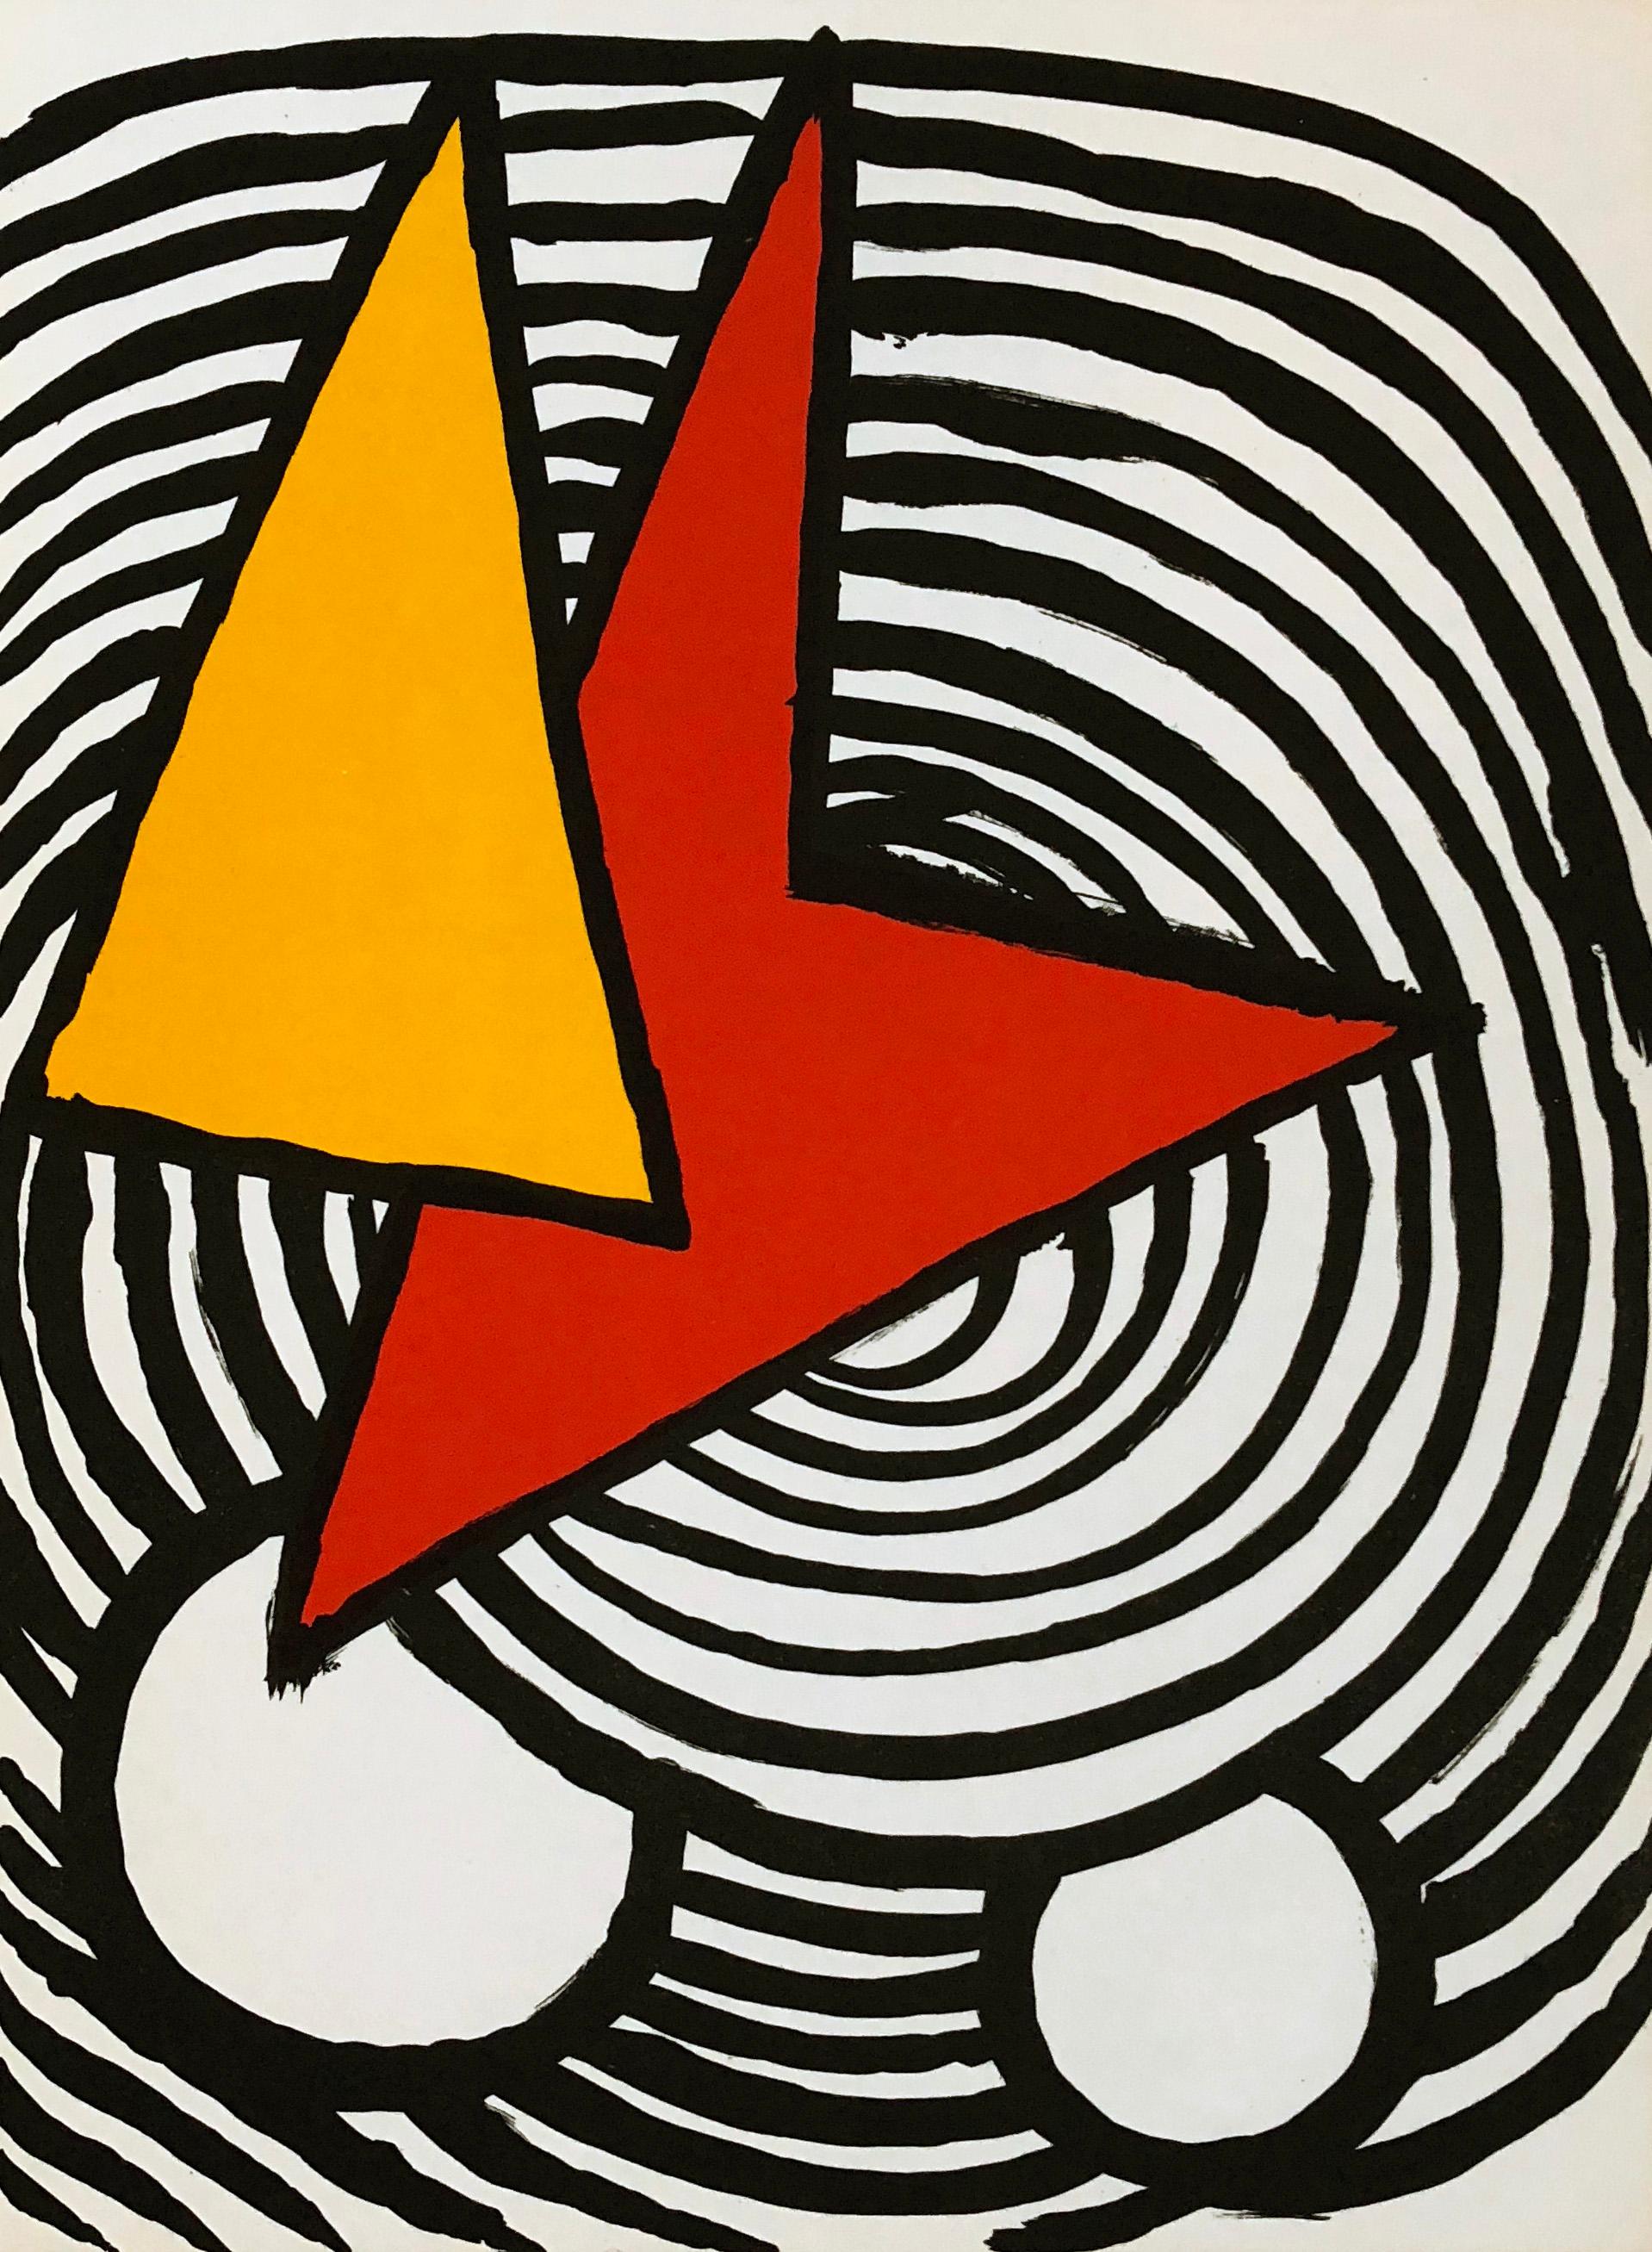 Alexander Calder Lithograph c. 1973 from Derrière le miroir:

Lithograph in colors; 15 x 11 inches.
Very good overall vintage condition; well-preseved. 
Unsigned from an edition of unknown.
From: Derrière le miroir Printed in France c. 1967.